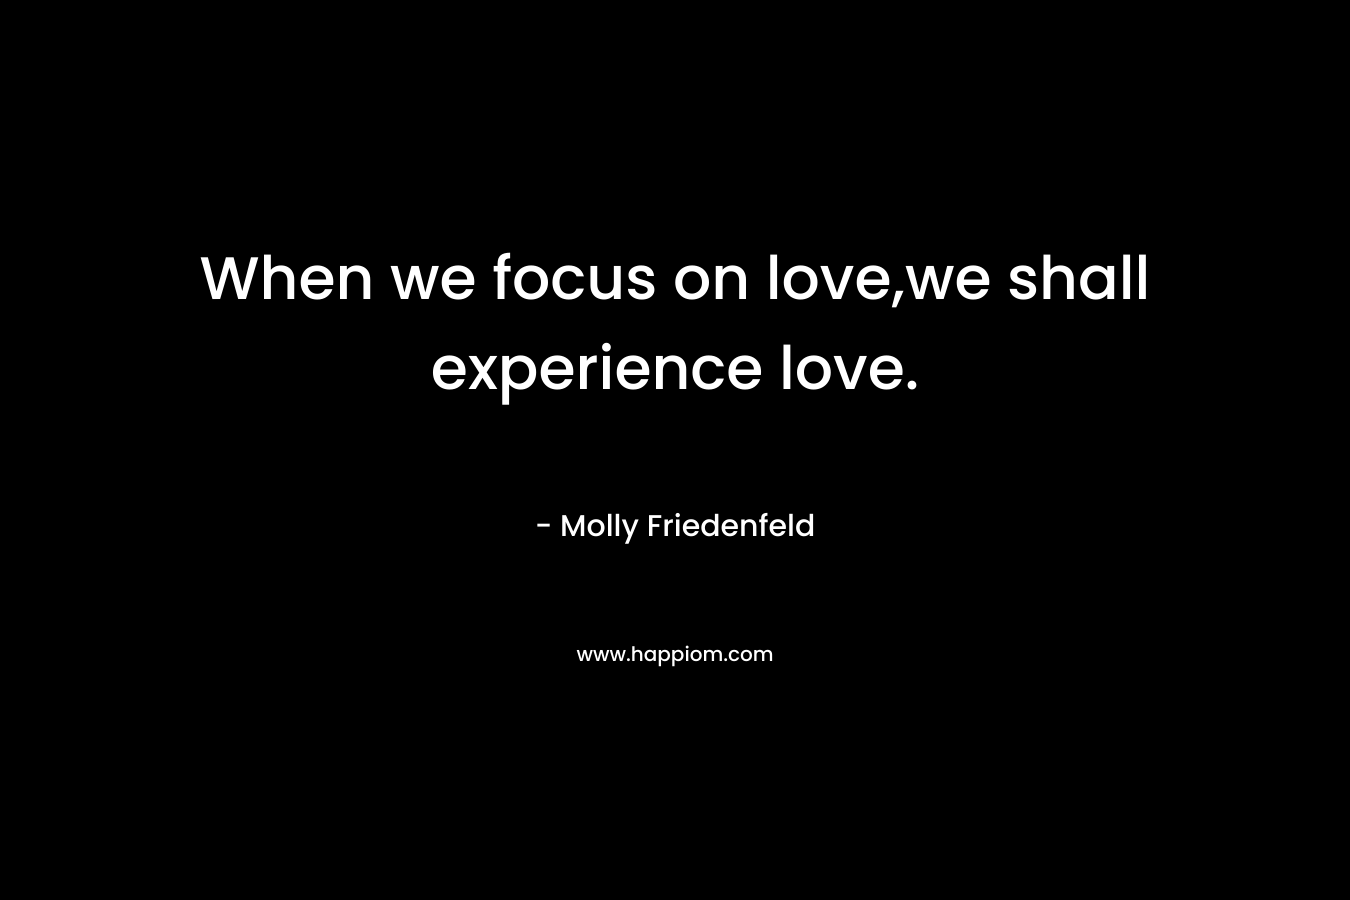 When we focus on love,we shall experience love. – Molly Friedenfeld